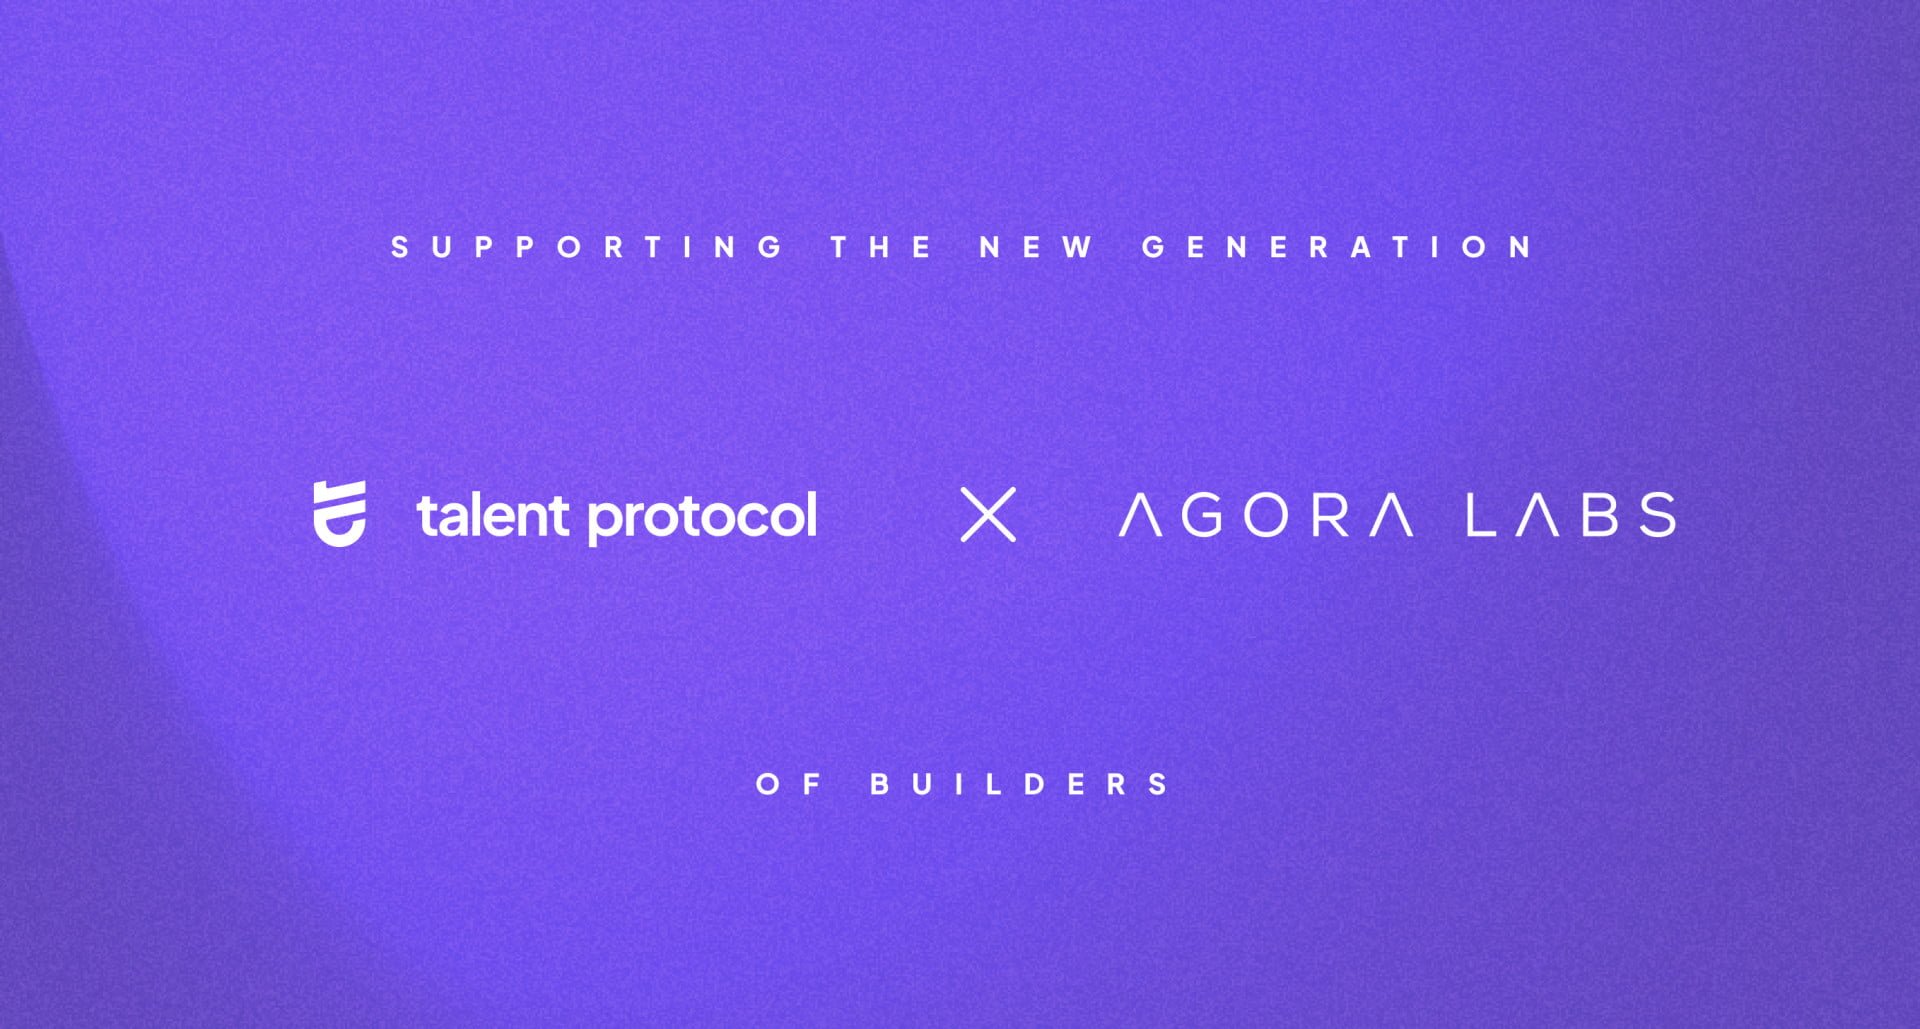 Talent Protocol supports the next generation of builders through the acquisition of Agora Labs 11